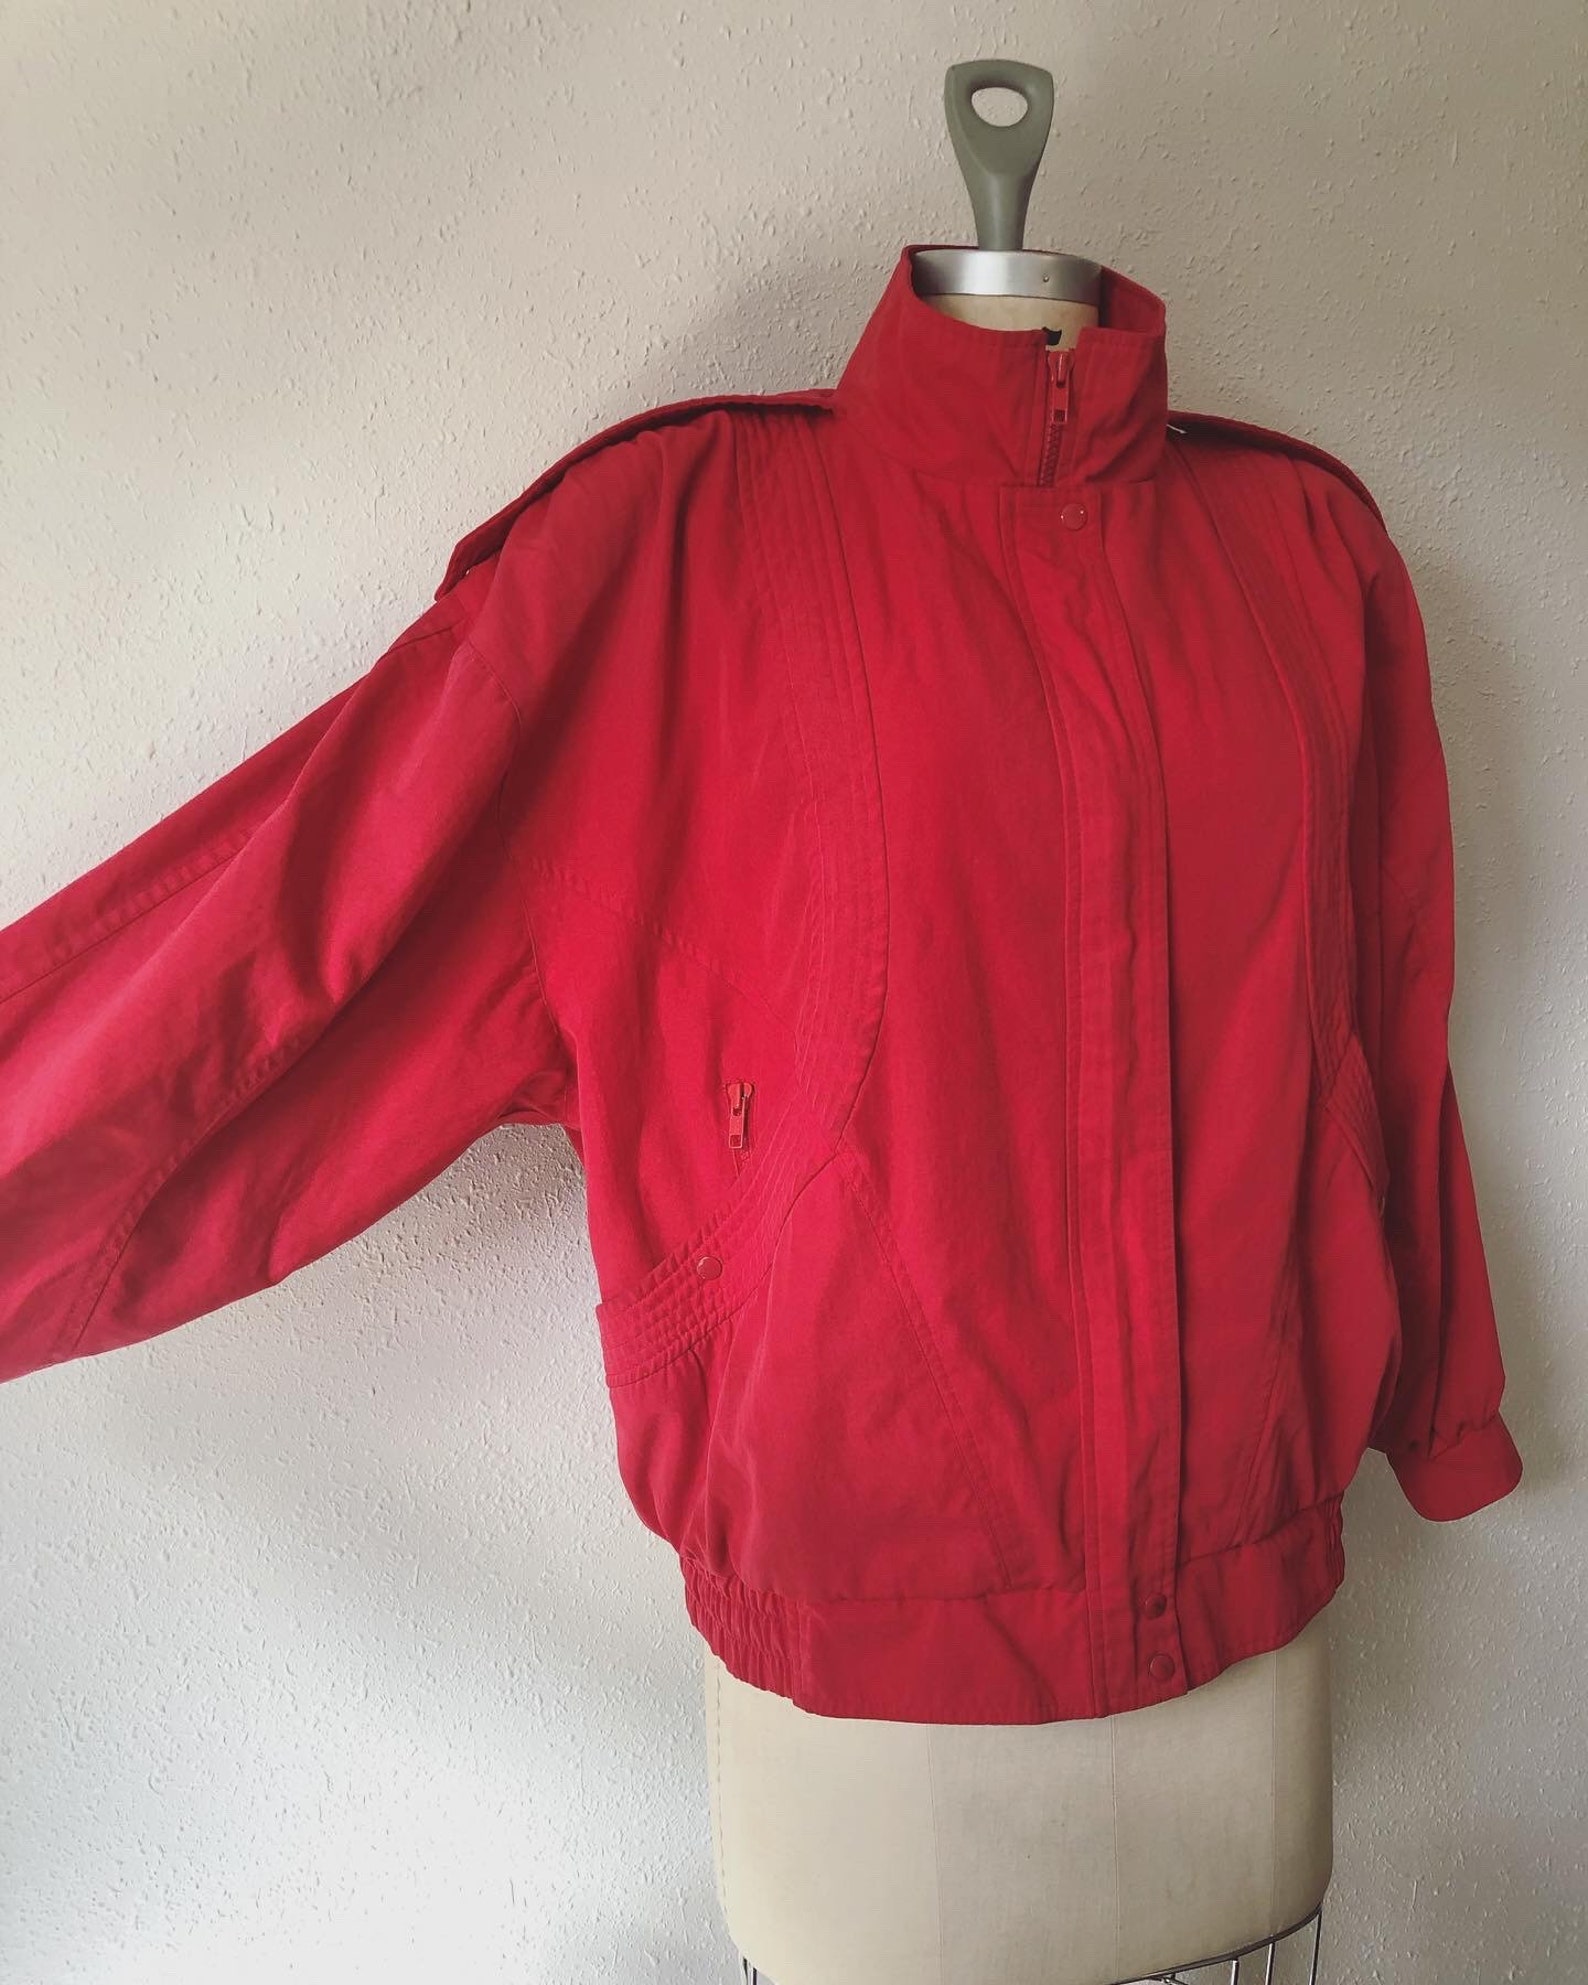 Vintage 1980s red members only unisex jacket by Gallery | Etsy